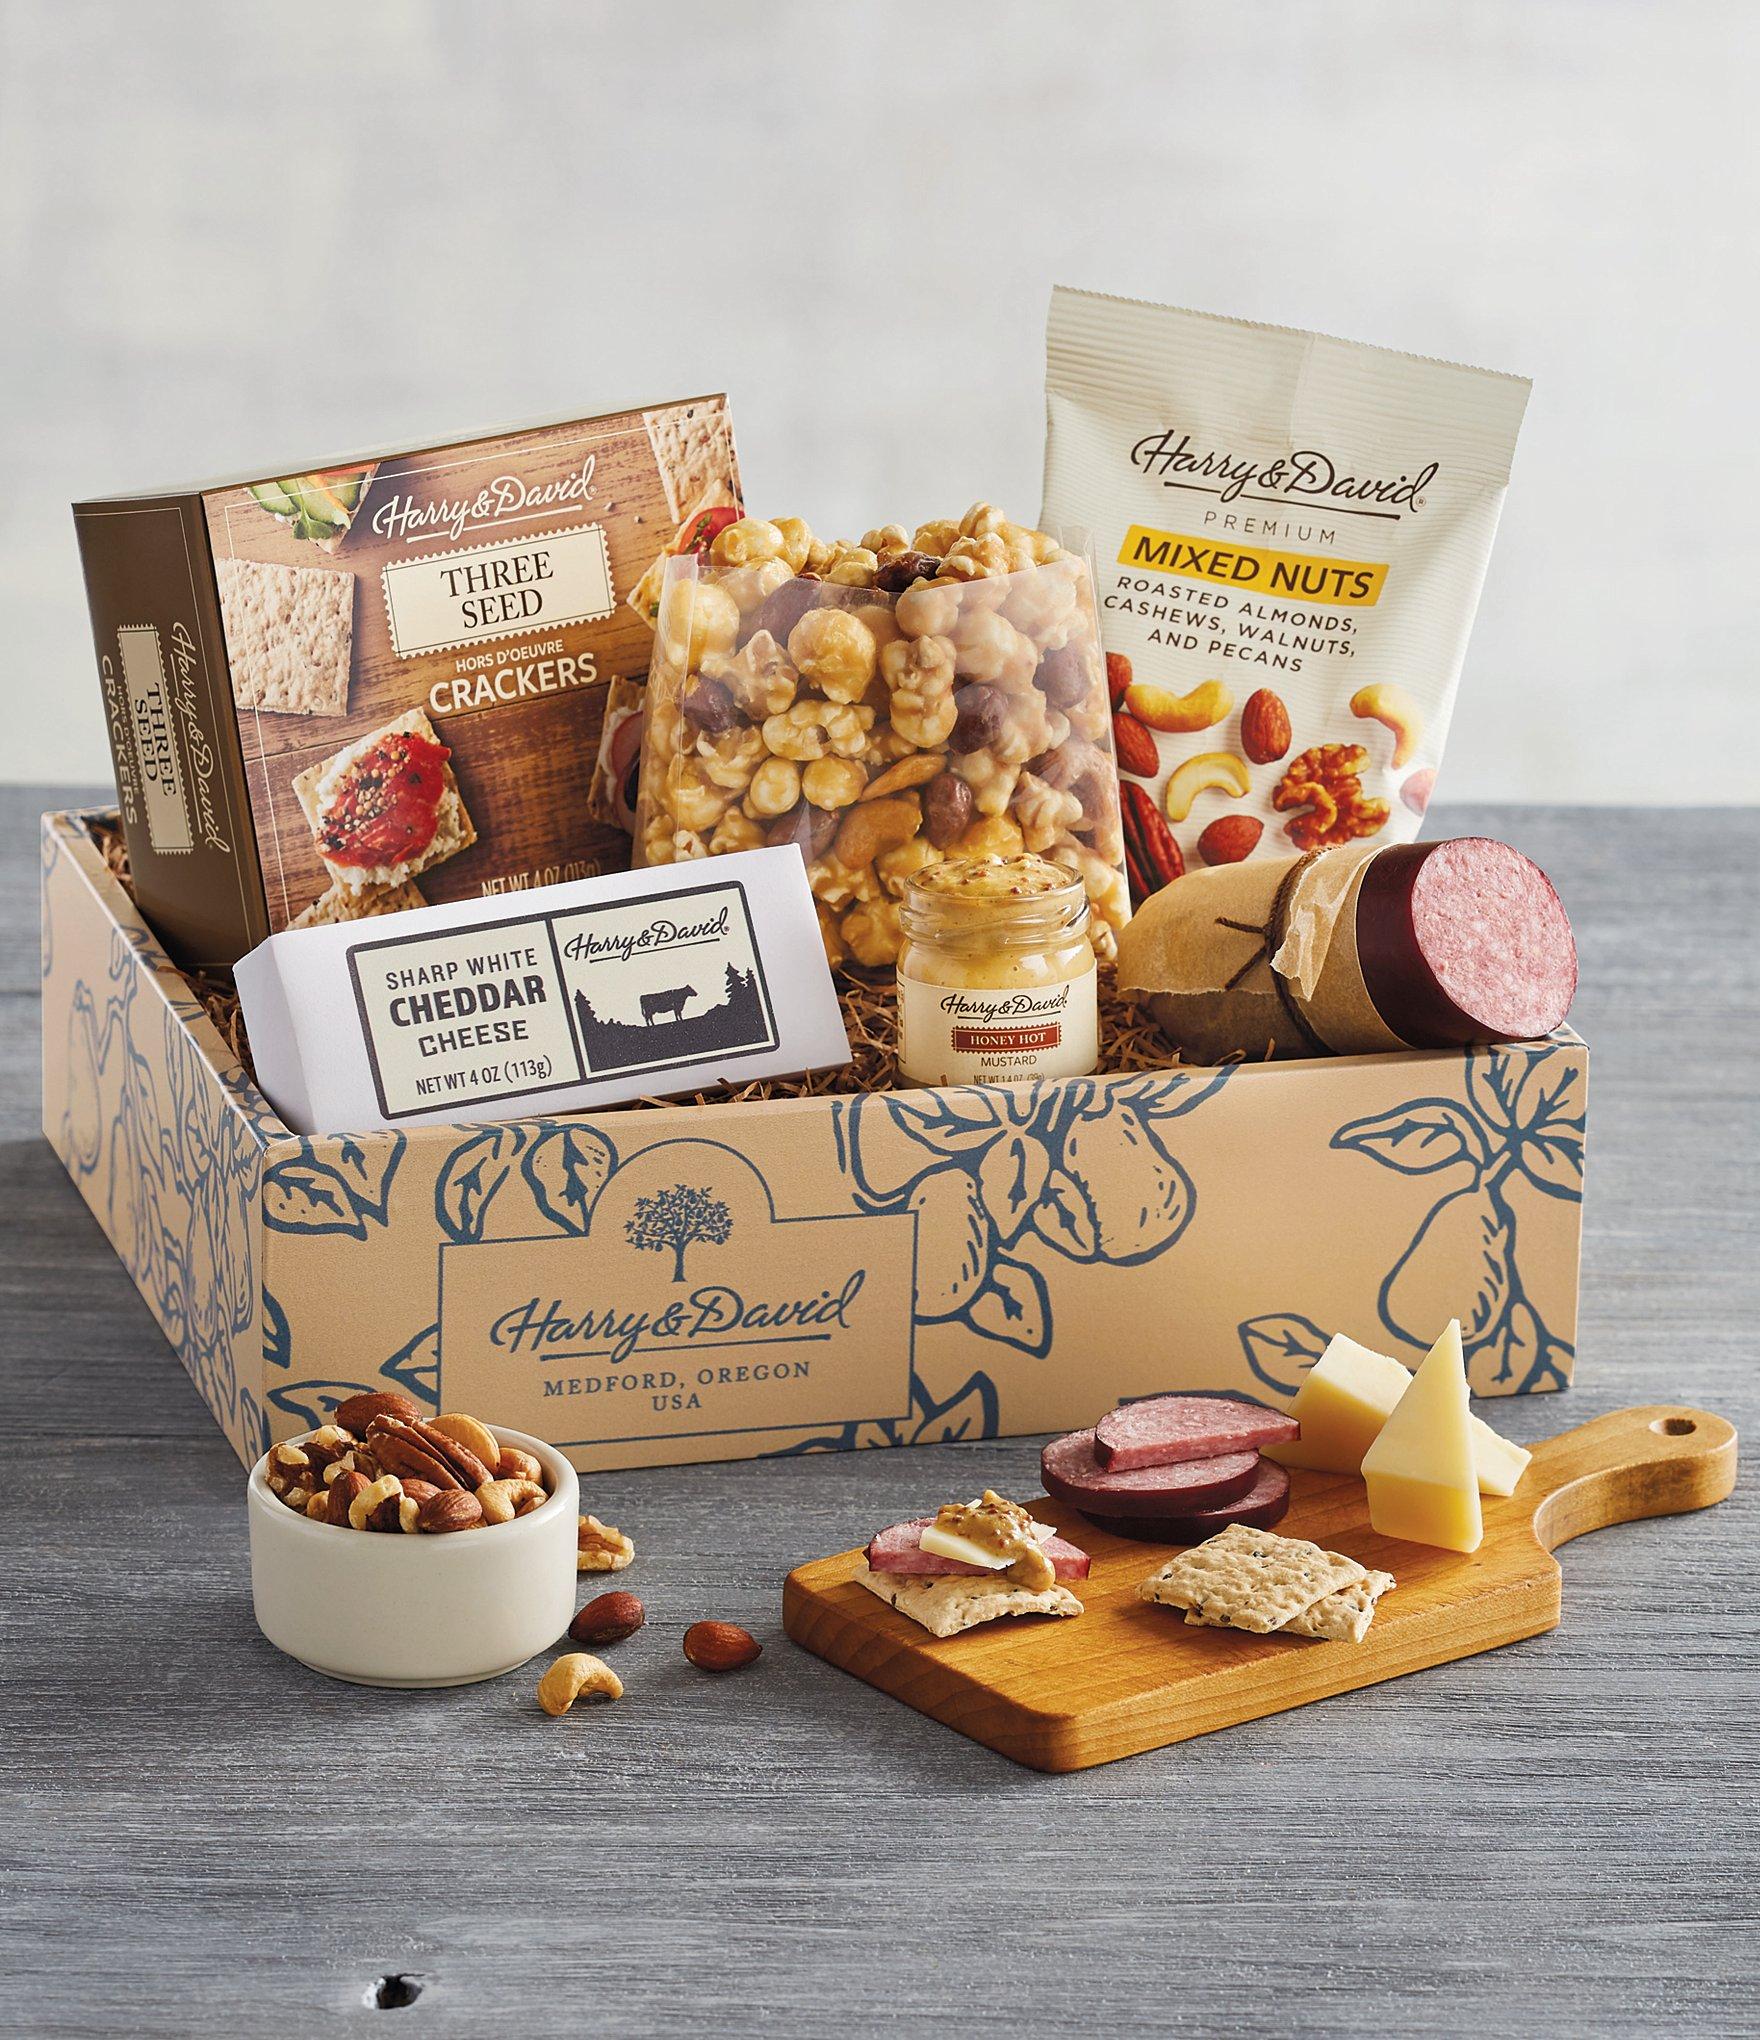 7 Creative For Making More Delicious Snack Boxes